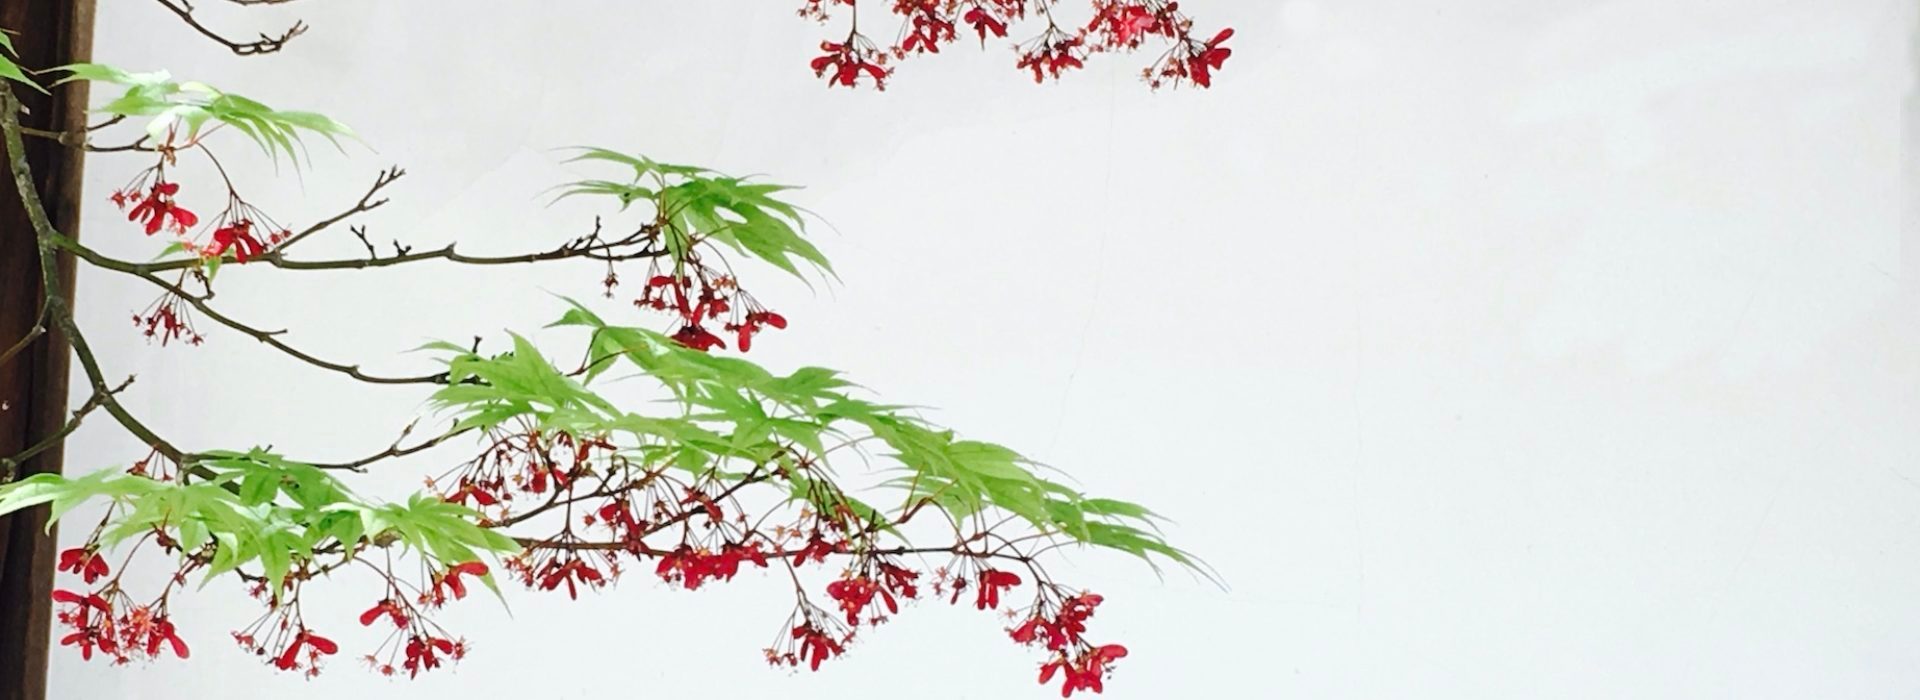 A branch of a Japanese Maple, with green leaves and red seeds